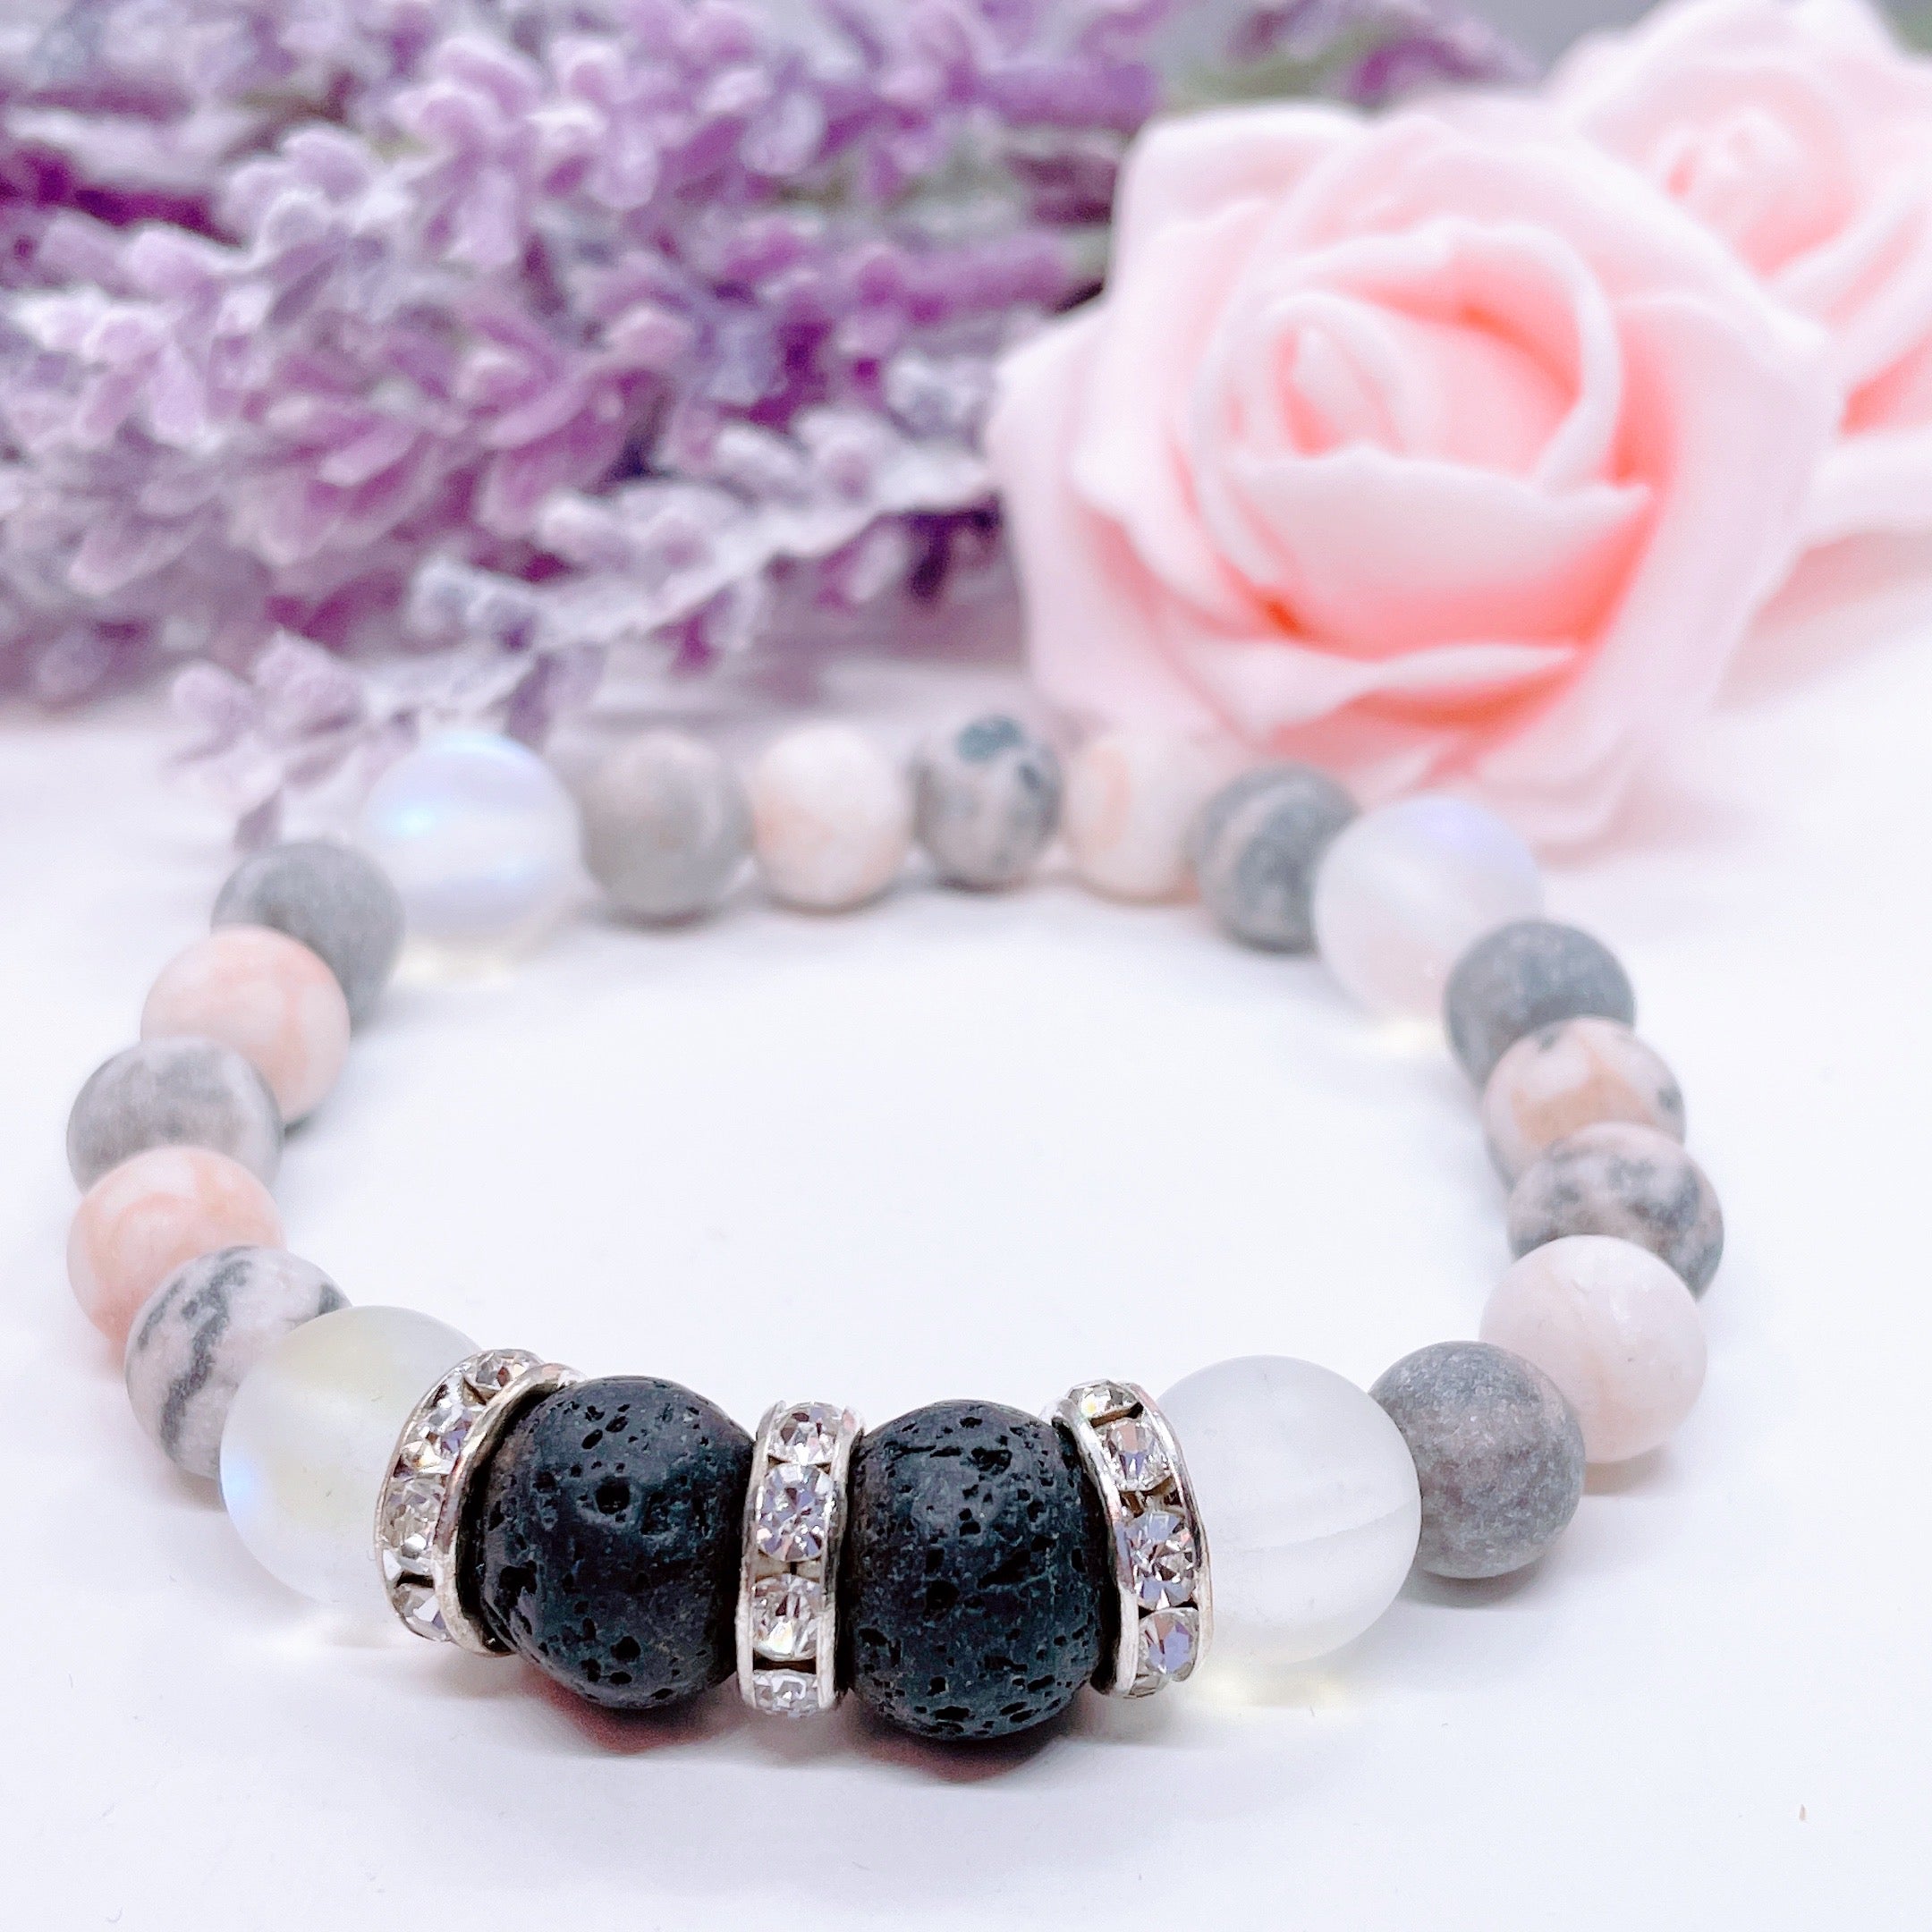 A Lava Stone and Rhinestone stretch bracelet made with 2 rough black lava stones, translucent aura beads, pink zebra jasper gemstones, and rhinestone accents for added sparkle sits on a white table. 